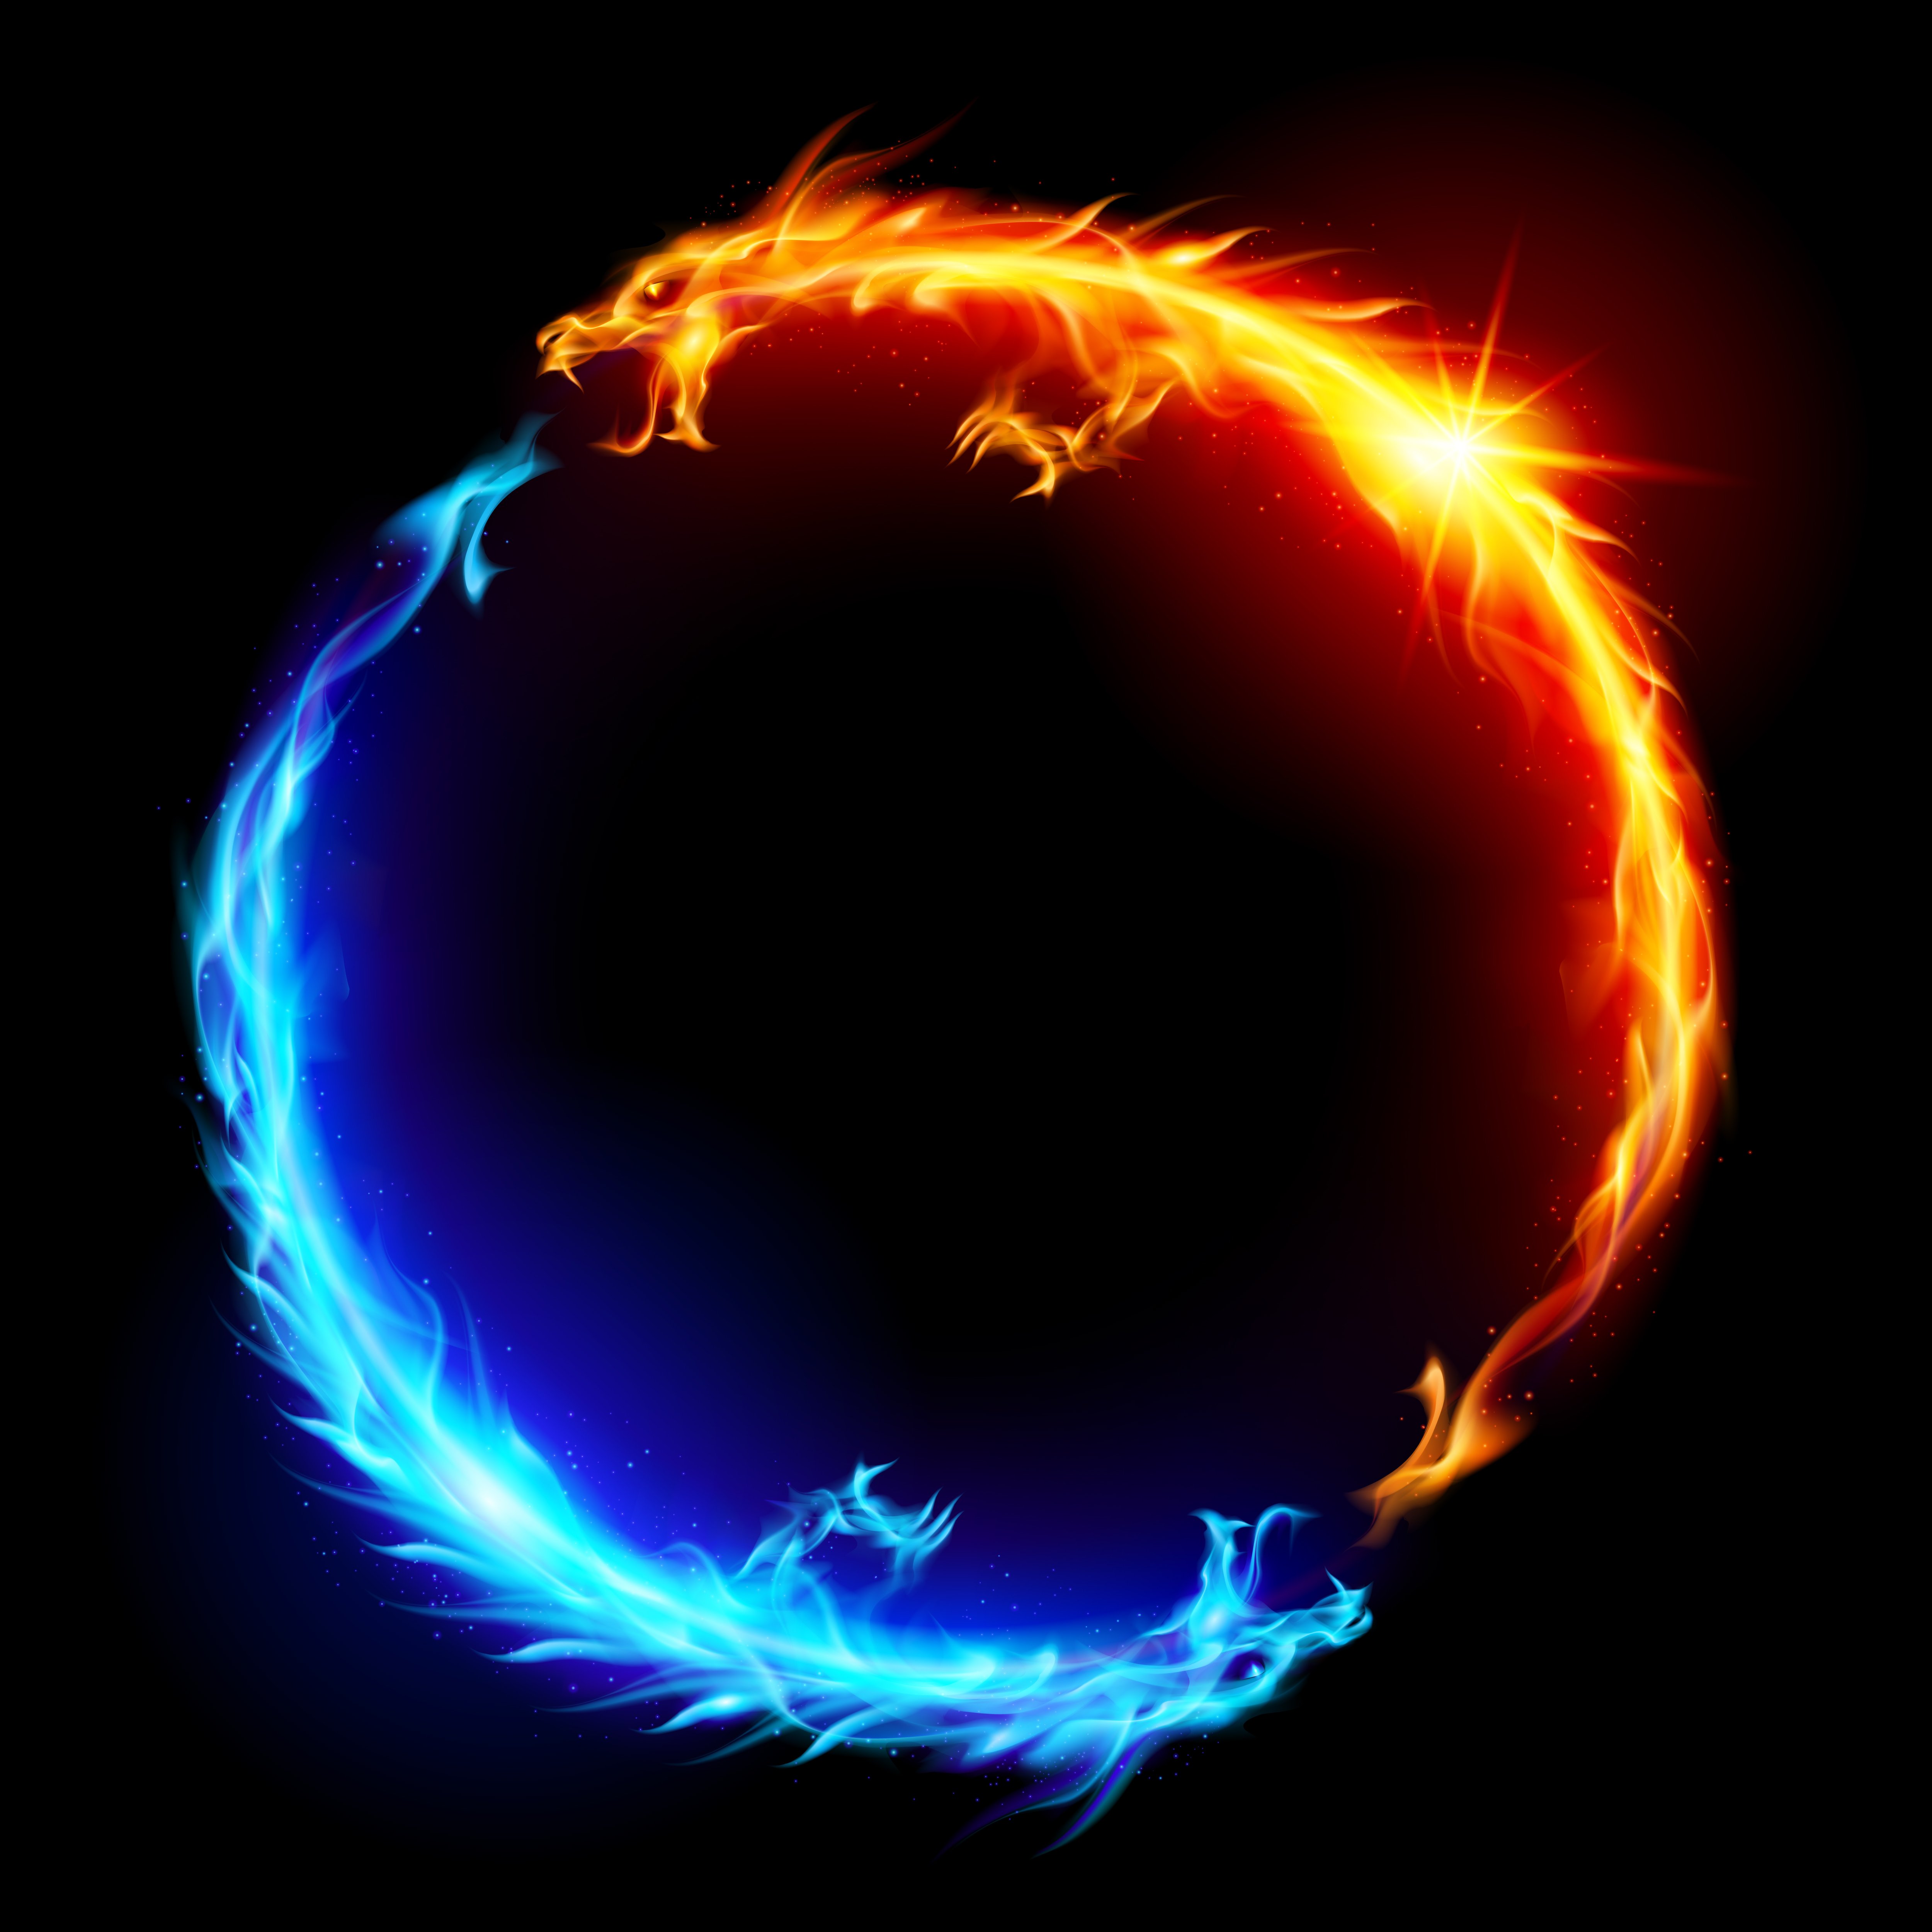 Blue and red fire dragons stephen josephs